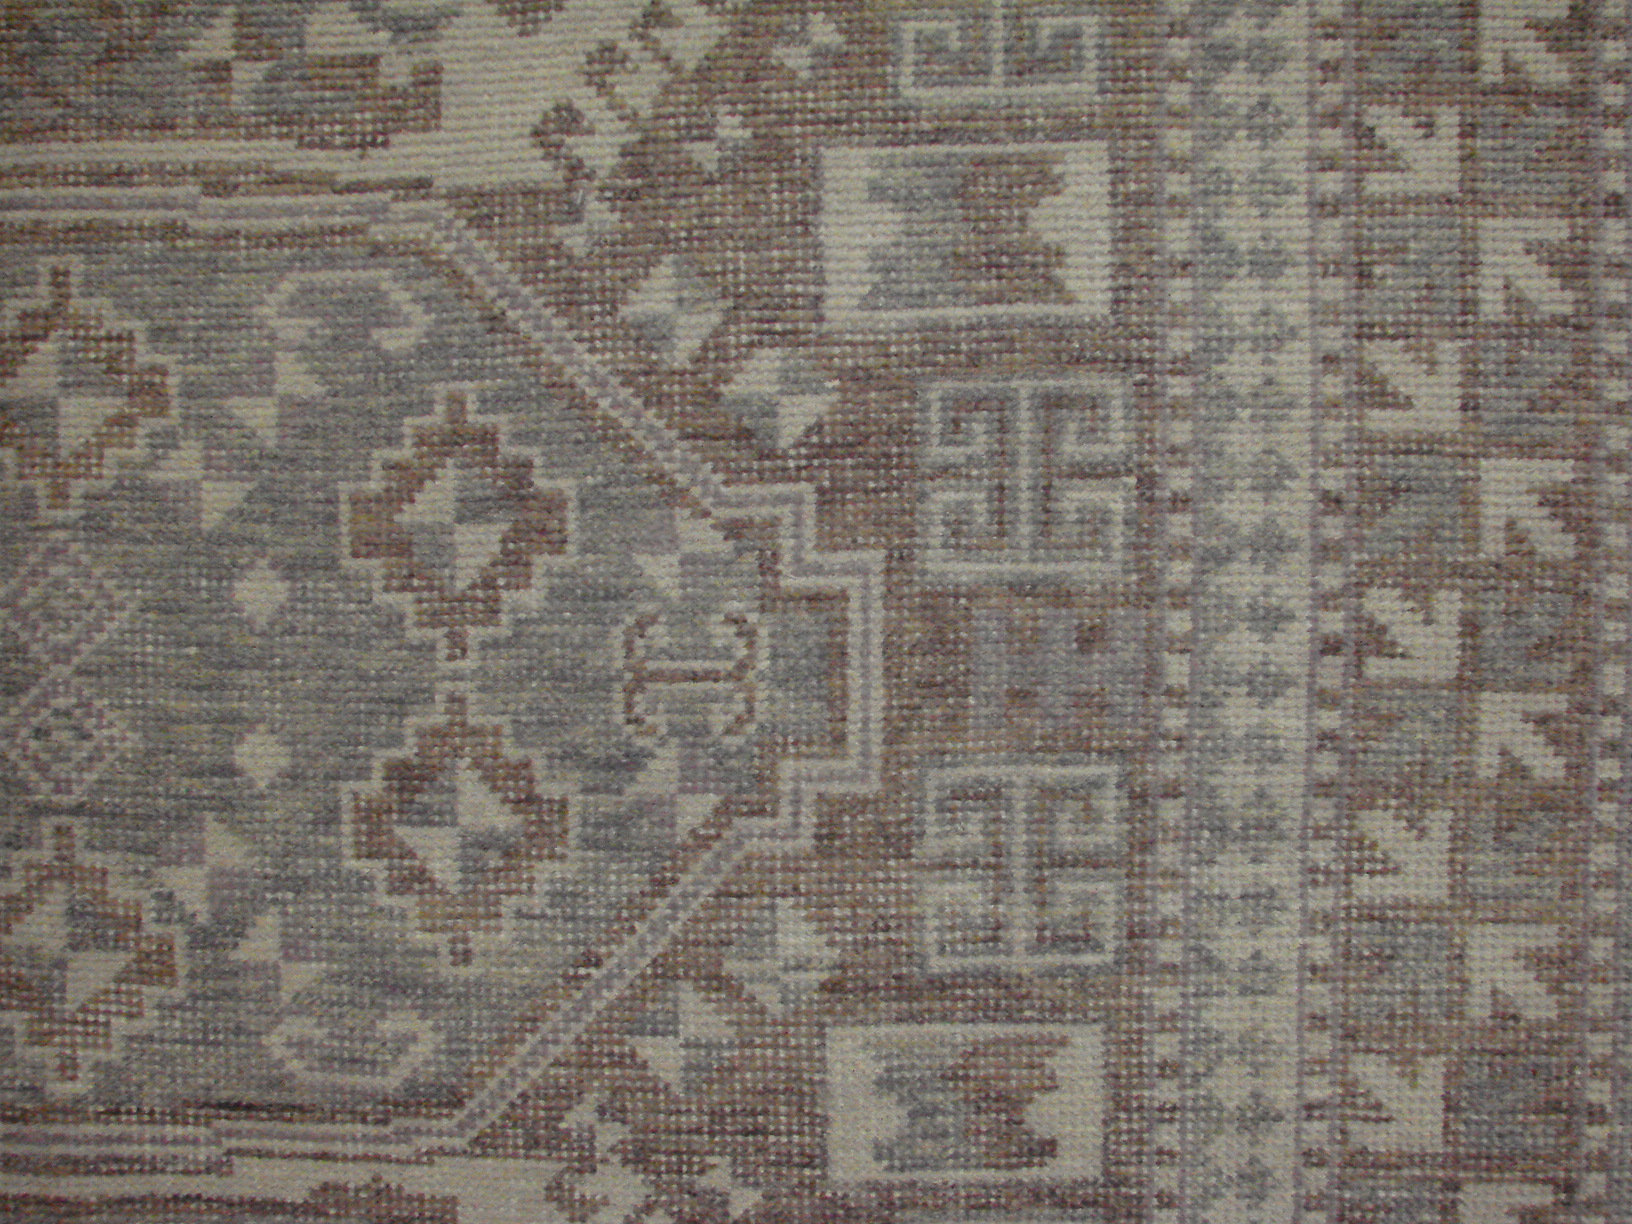 Persian & Tribal Rugs Turk-3 21915 Aqua - Lt.Green & Camel - Taupe Hand Knotted Rug